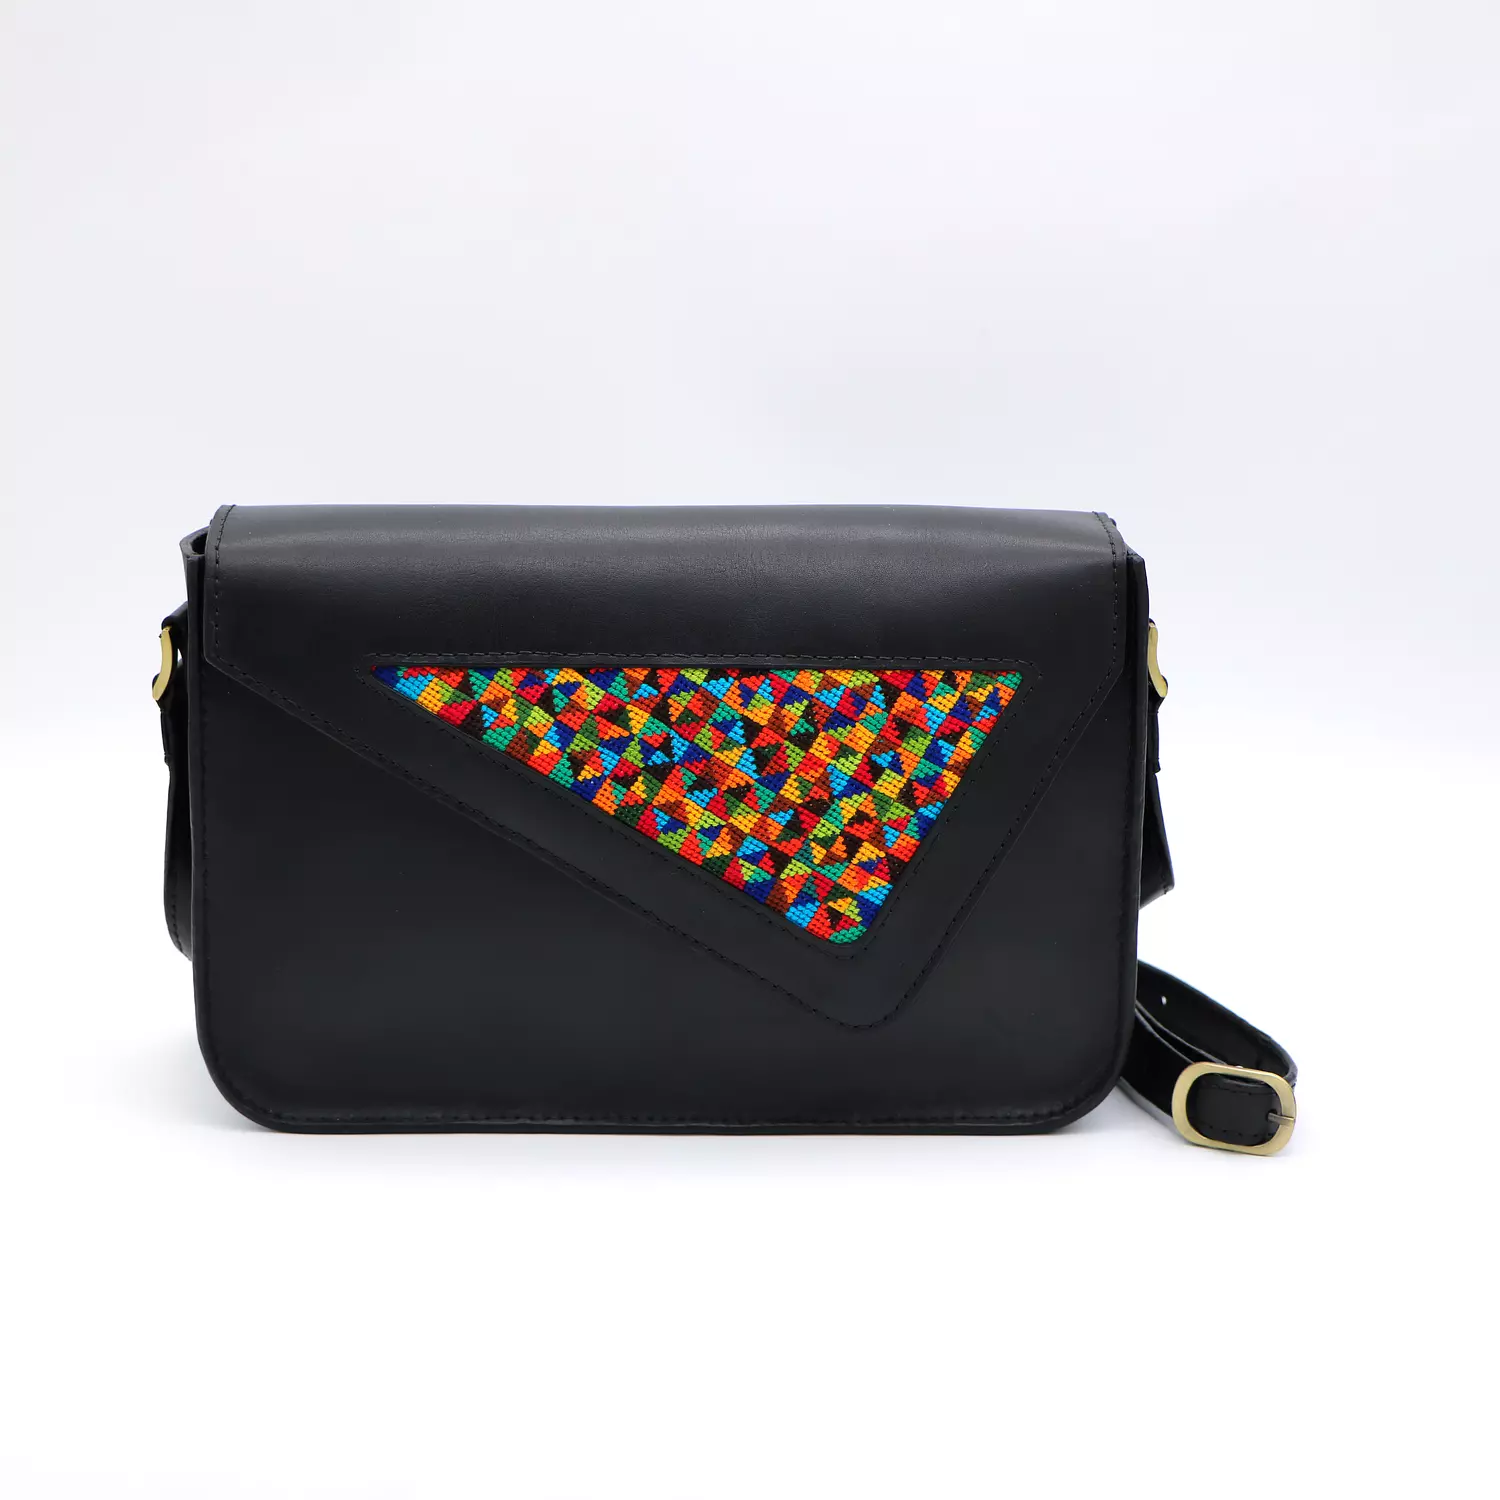 Genuine leather bag with colorful cross-stitching. 1